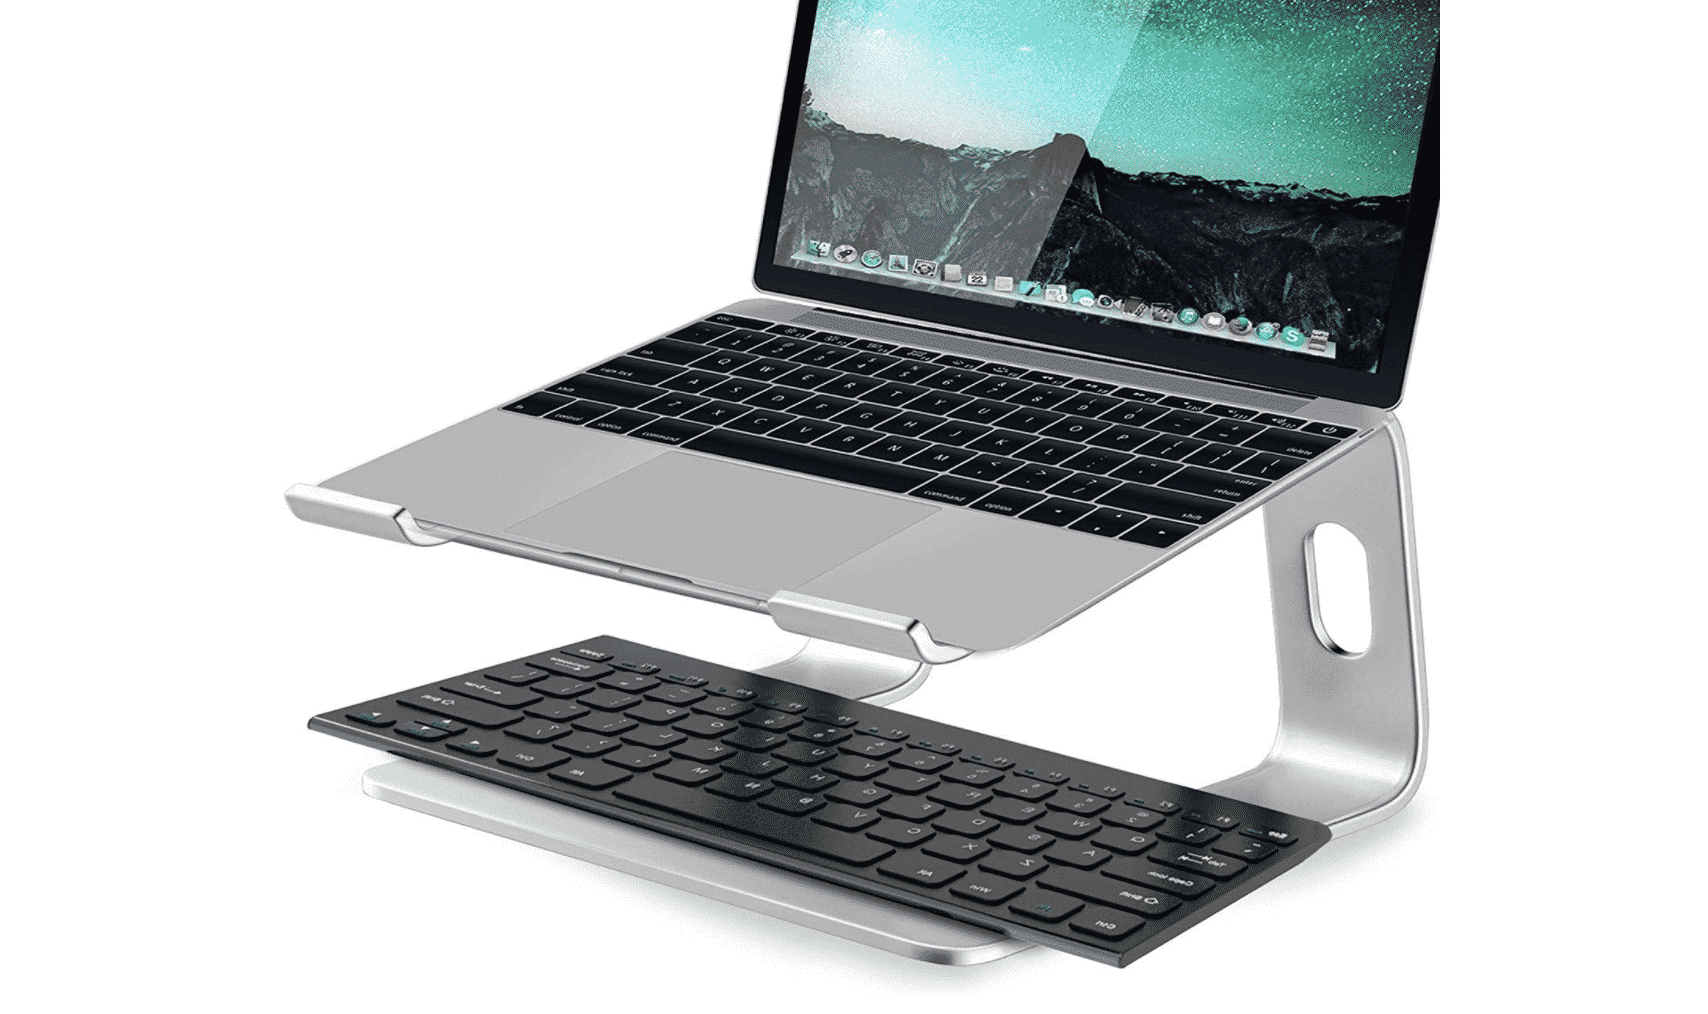 Sturdy and Stylish Aluminum Stand for Your MacBook